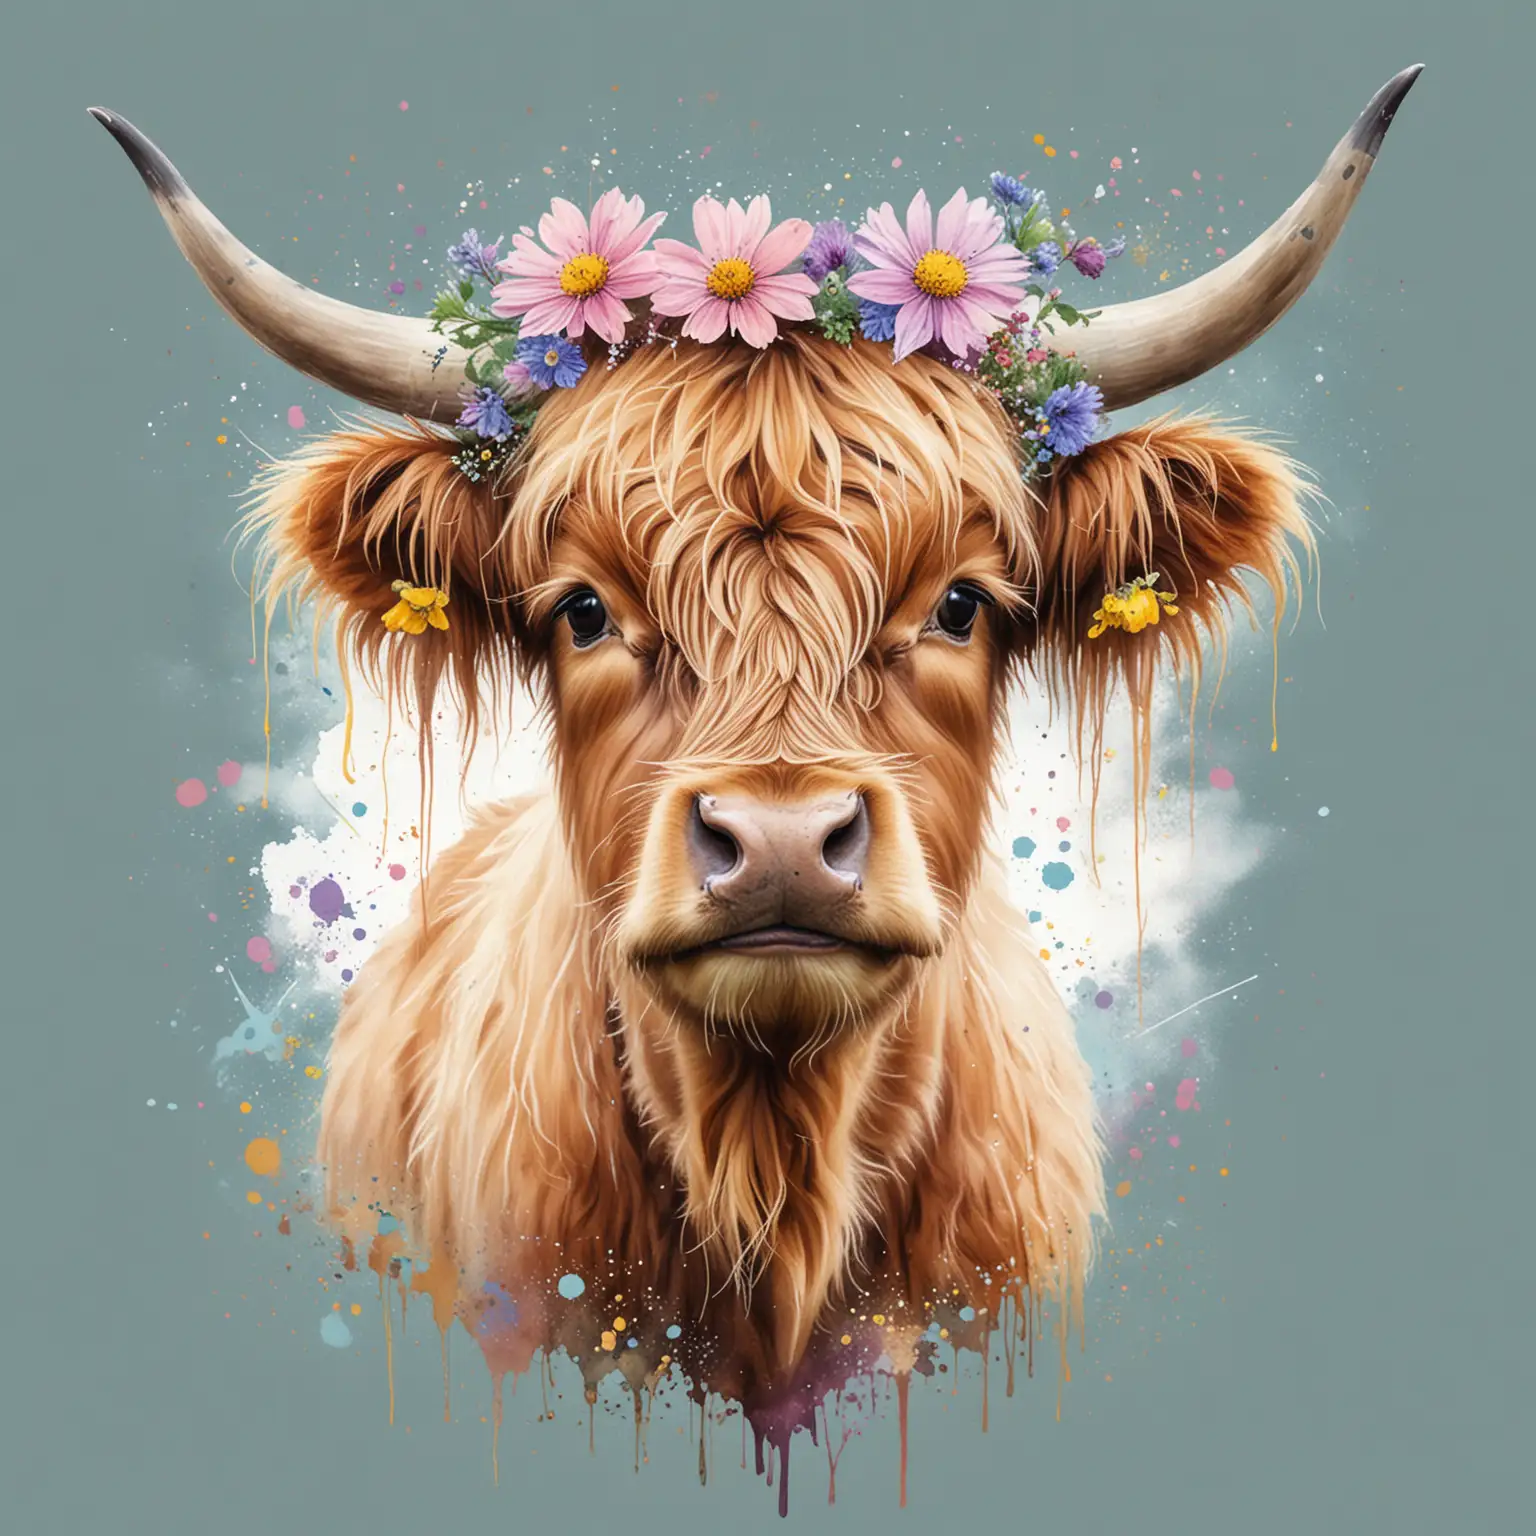 Highland Calf Portrait Whimsical Watercolour Effect with Pastel Splatter and Floral Adornments